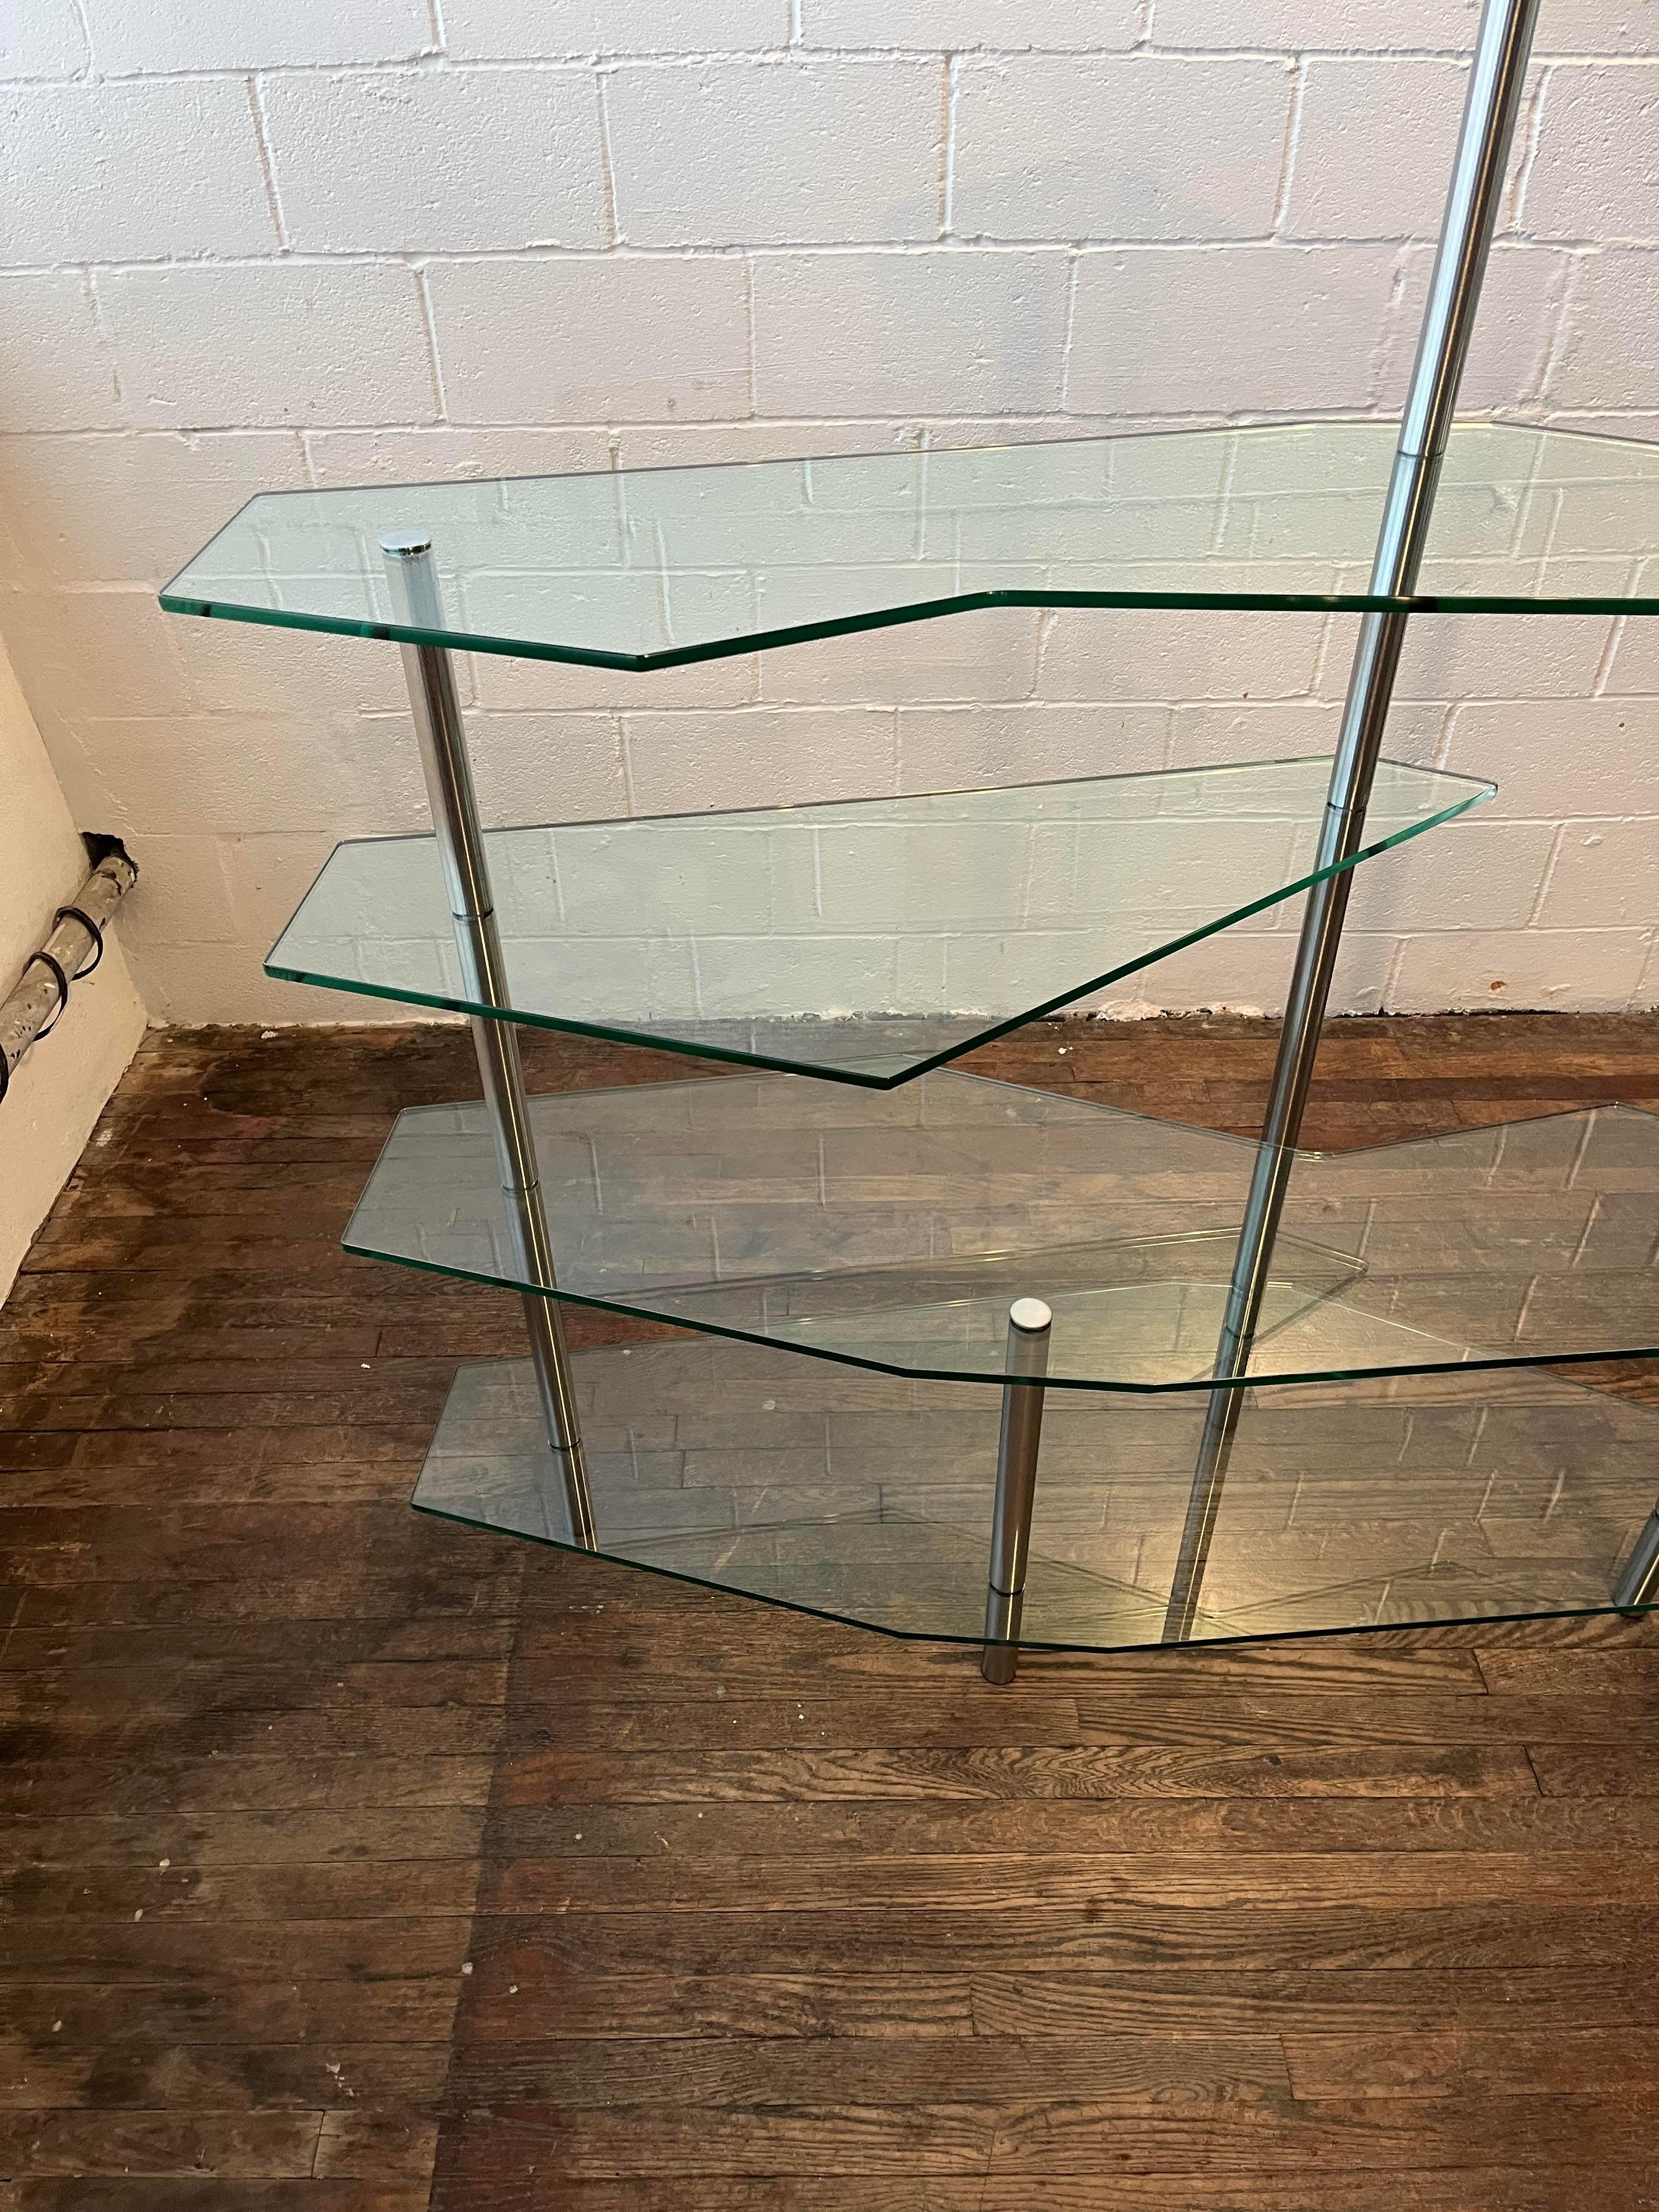 Modern Freeform Steel and Glass Shelving Unit In Good Condition For Sale In W Allenhurst, NJ